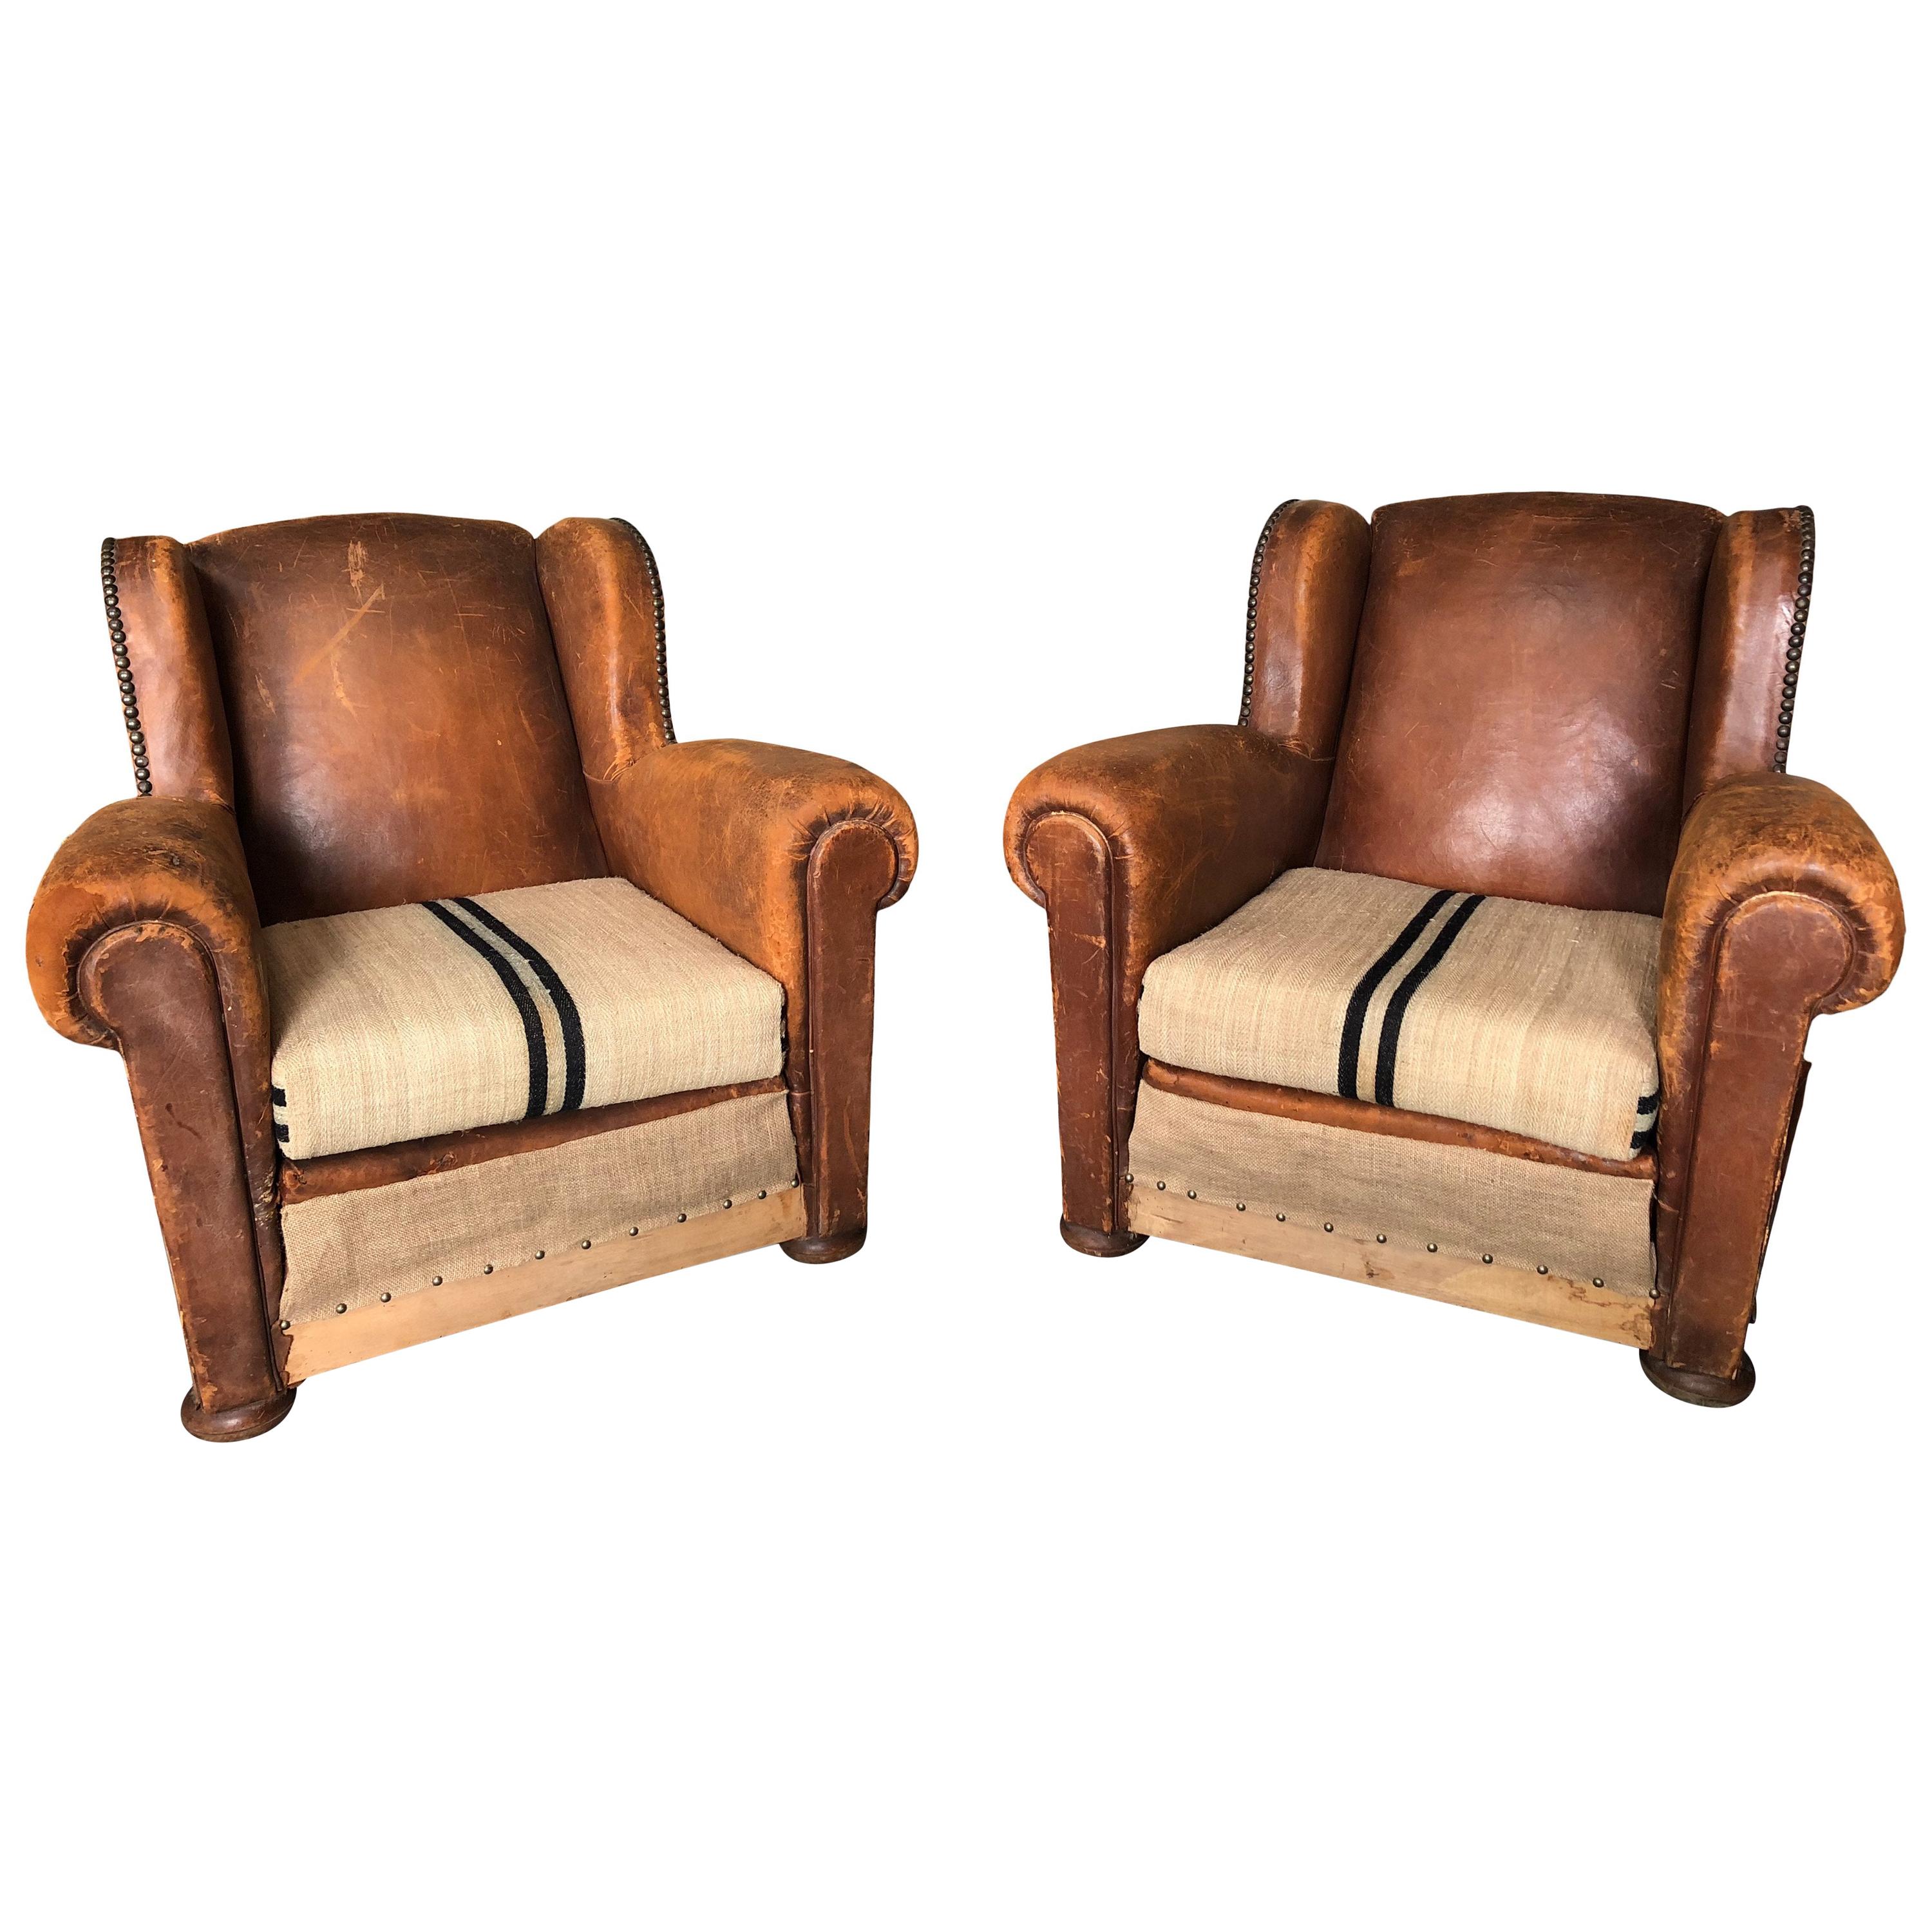 Pair of Vintage Reupholstered French Club Chairs